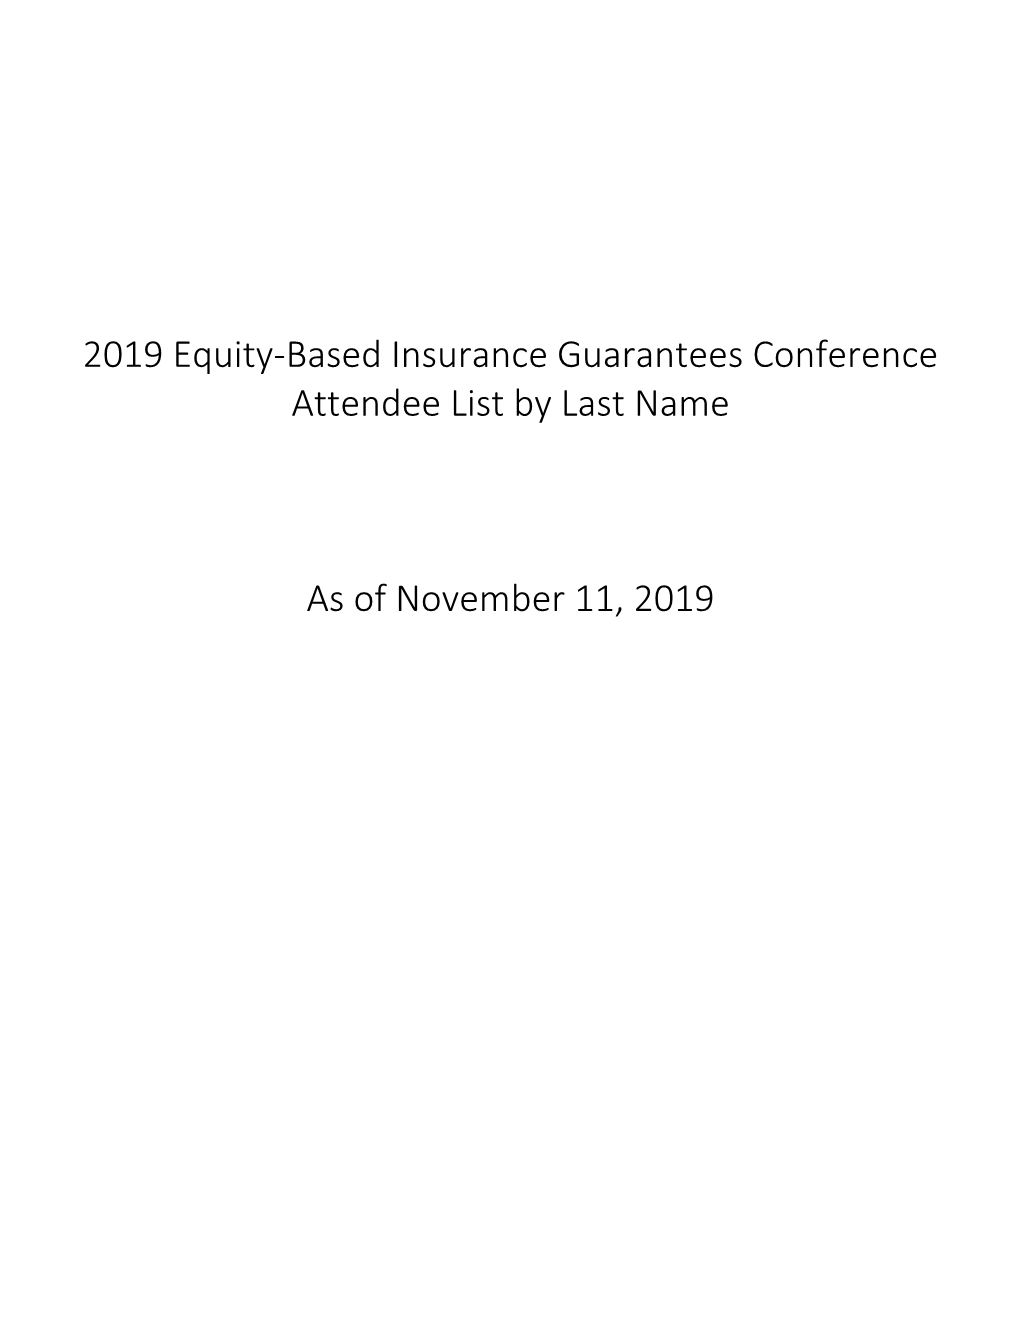 2019 Equity-Based Insurance Guarantees Conference Attendee List by Last Name